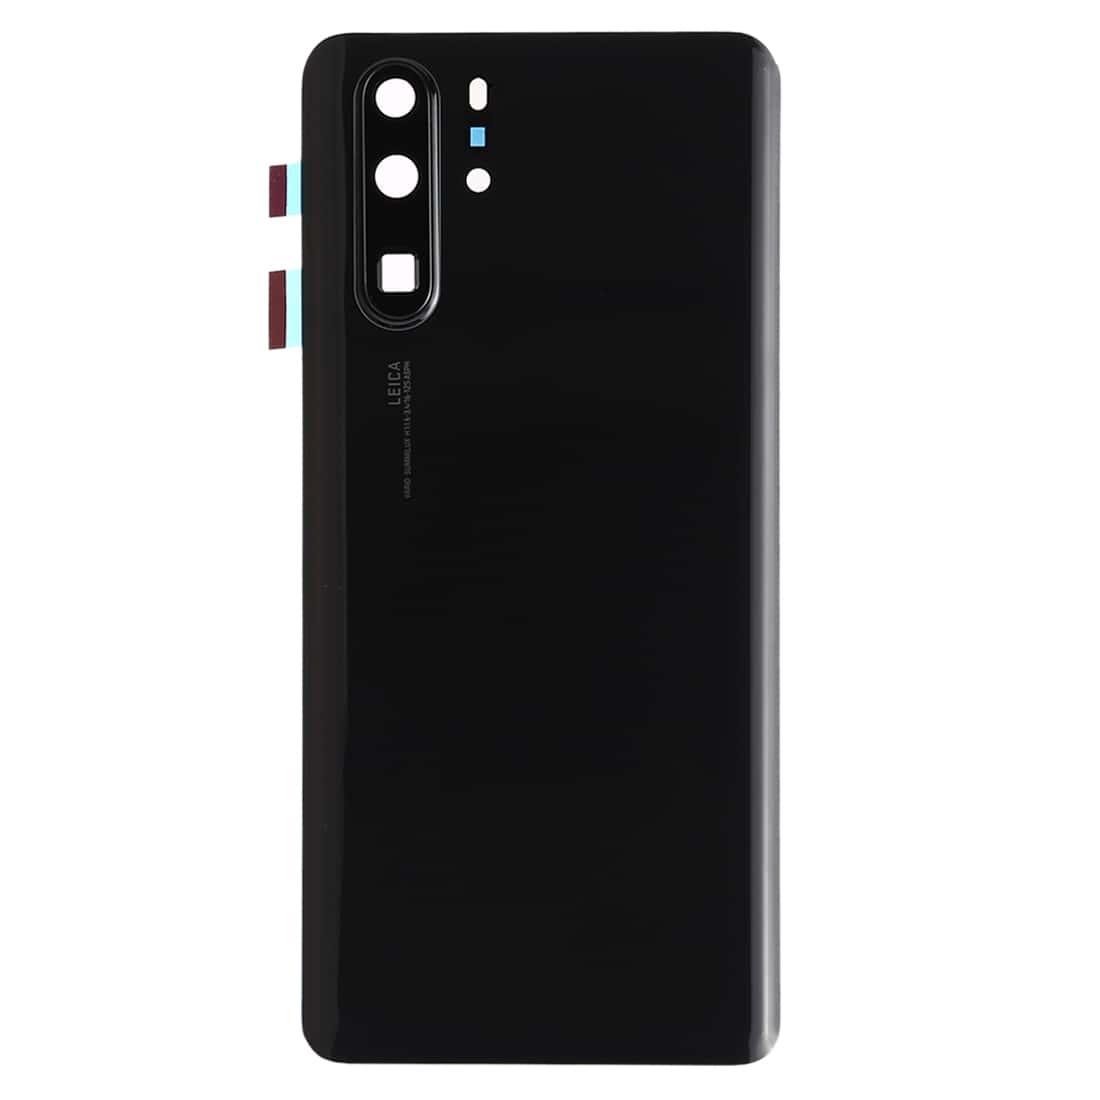 Back Glass Panel for Huawei P30 Pro Black with Camera Lens